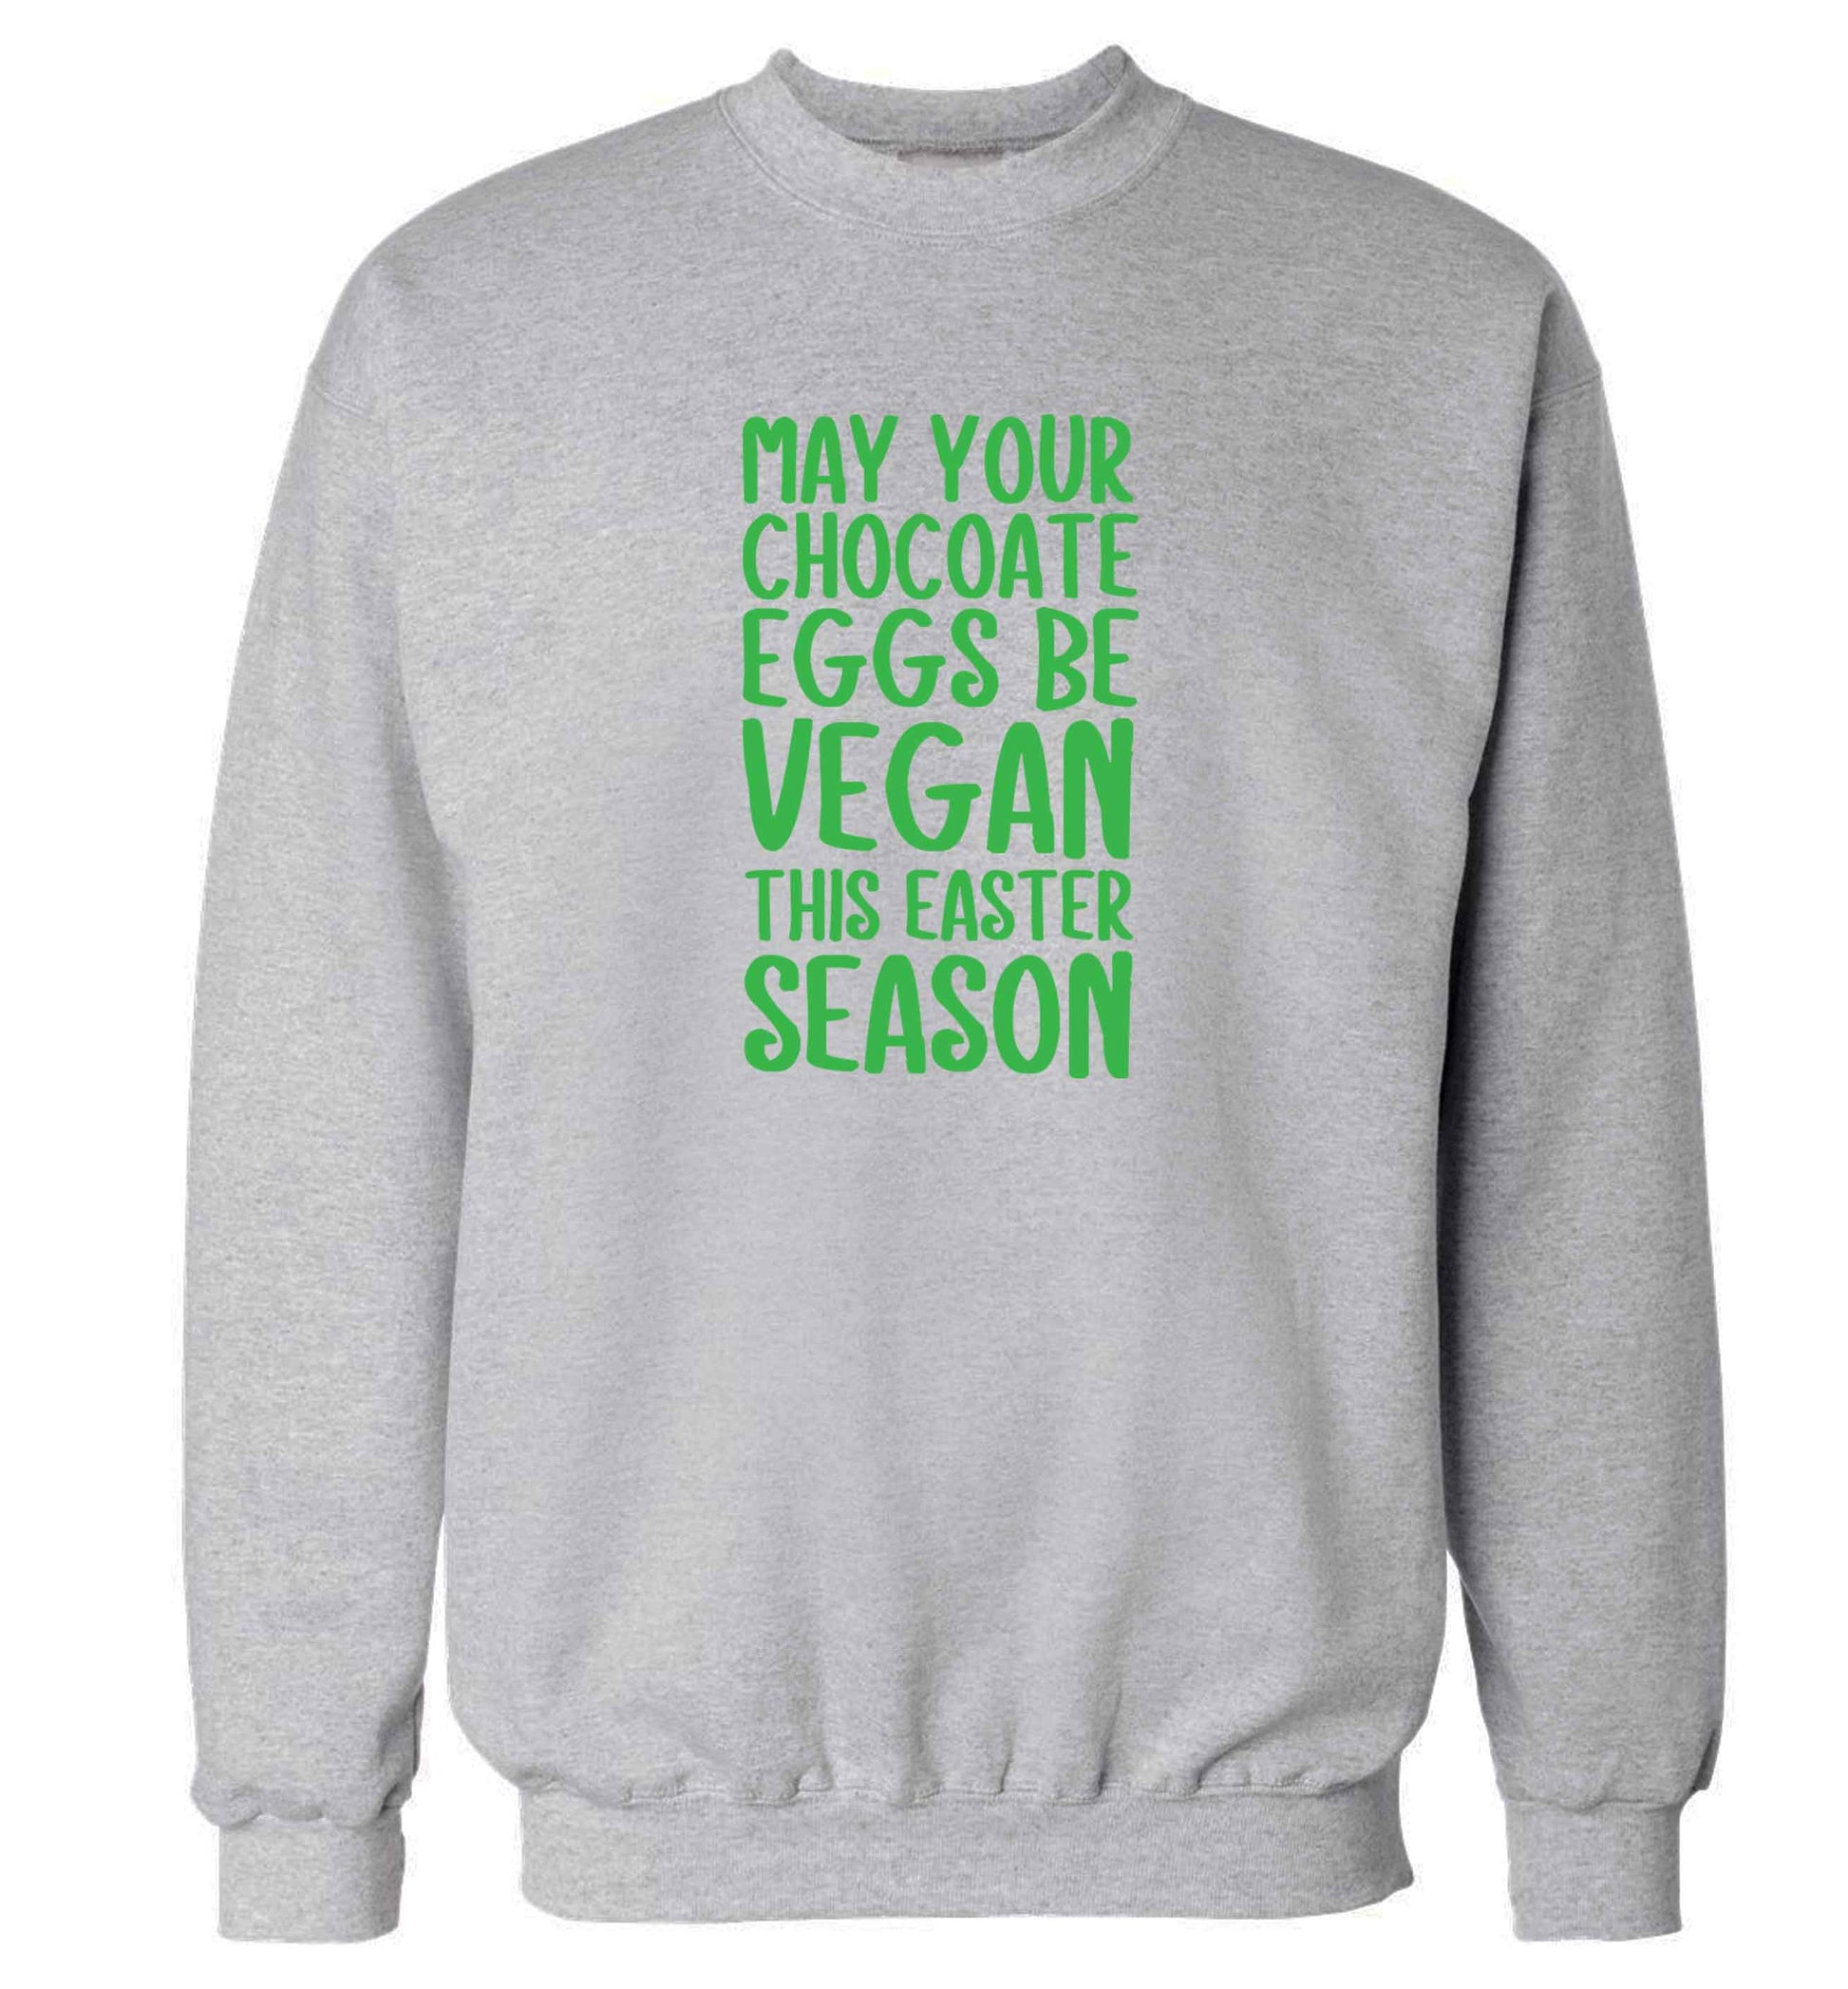 Easter bunny approved! Vegans will love this easter themed adult's unisex grey sweater 2XL